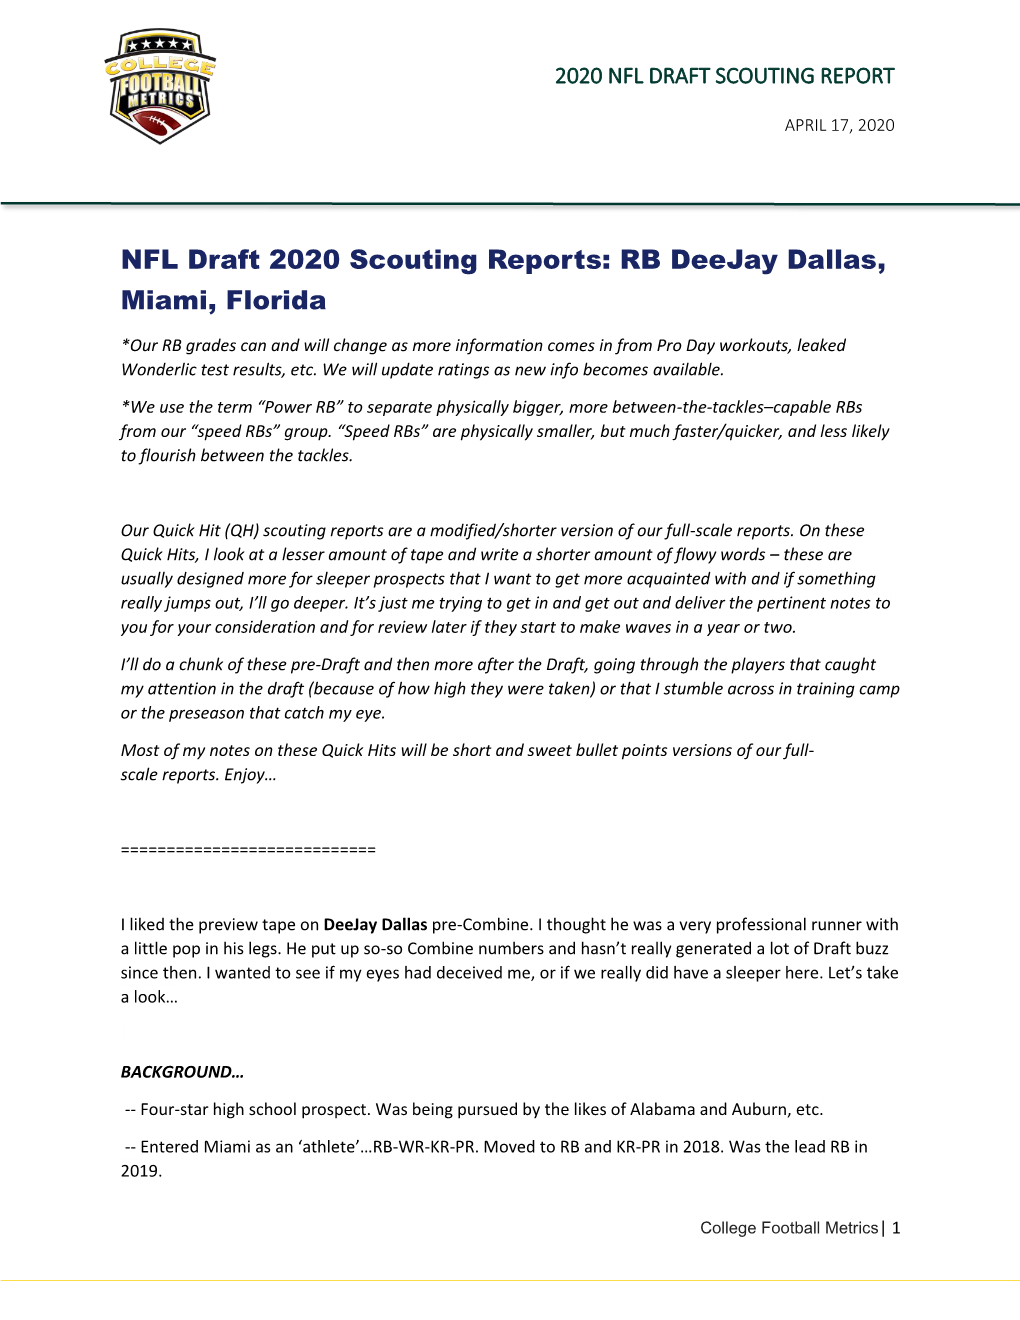 NFL Draft 2020 Scouting Reports: RB Deejay Dallas, Miami, Florida